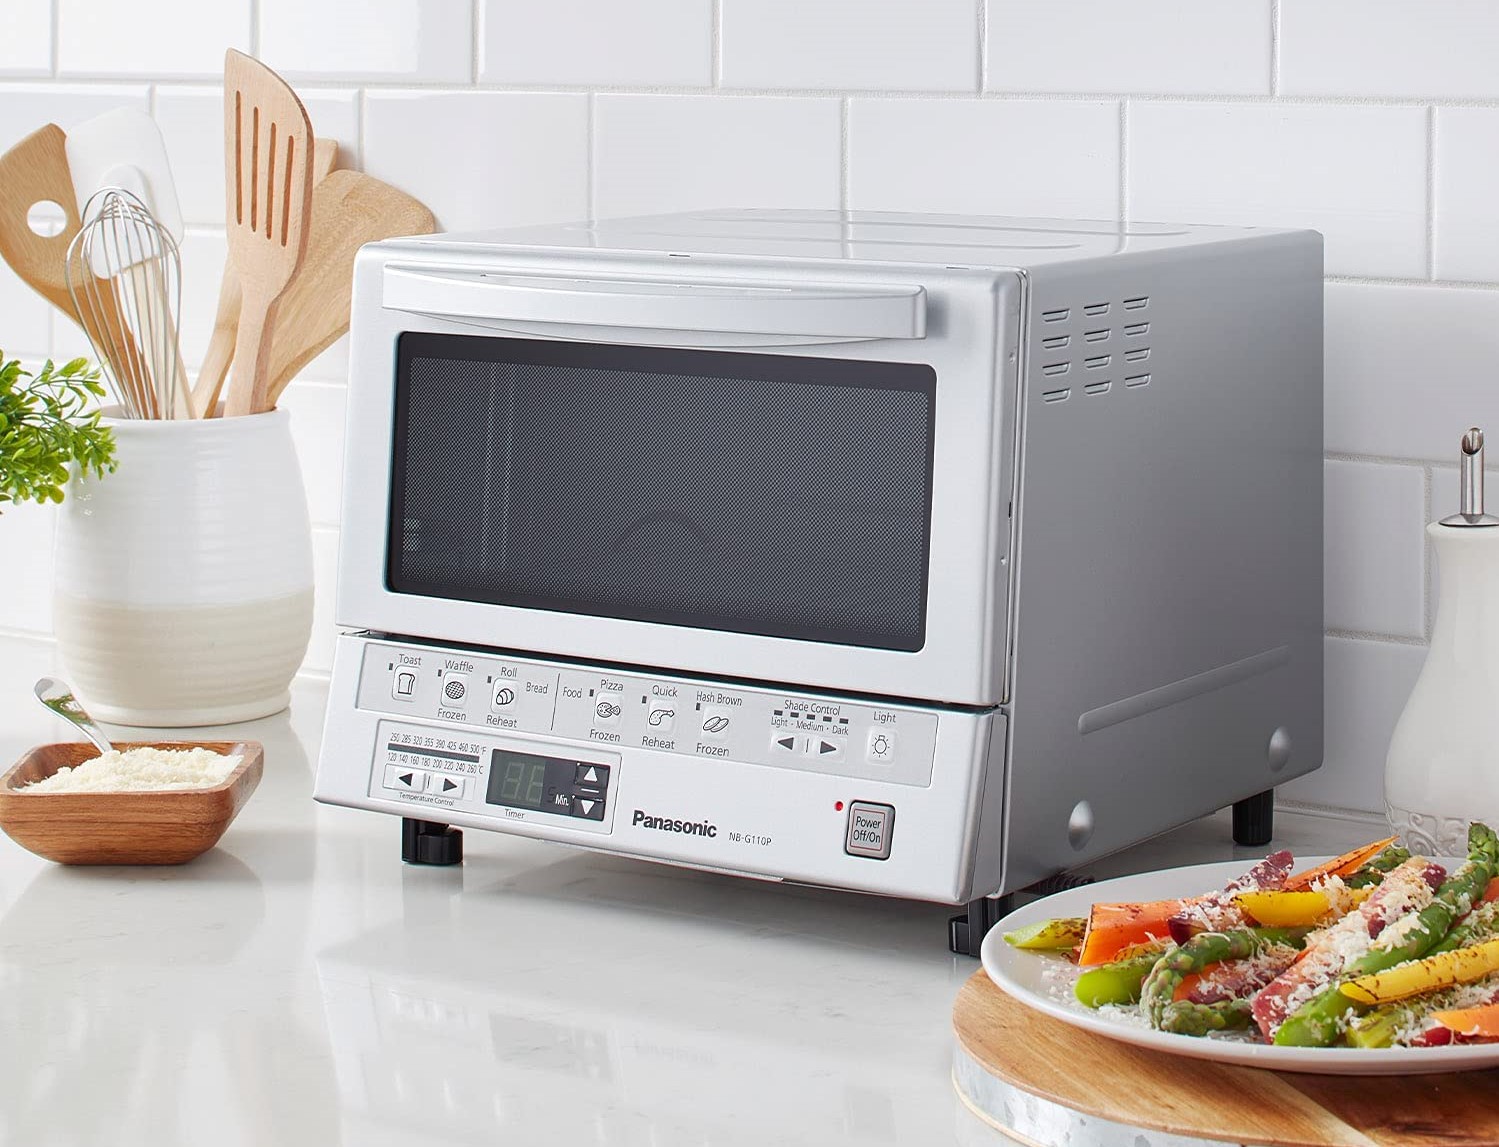 https://storables.com/wp-content/uploads/2023/08/14-incredible-panasonic-flash-express-toaster-oven-for-2023-1691013970.jpg